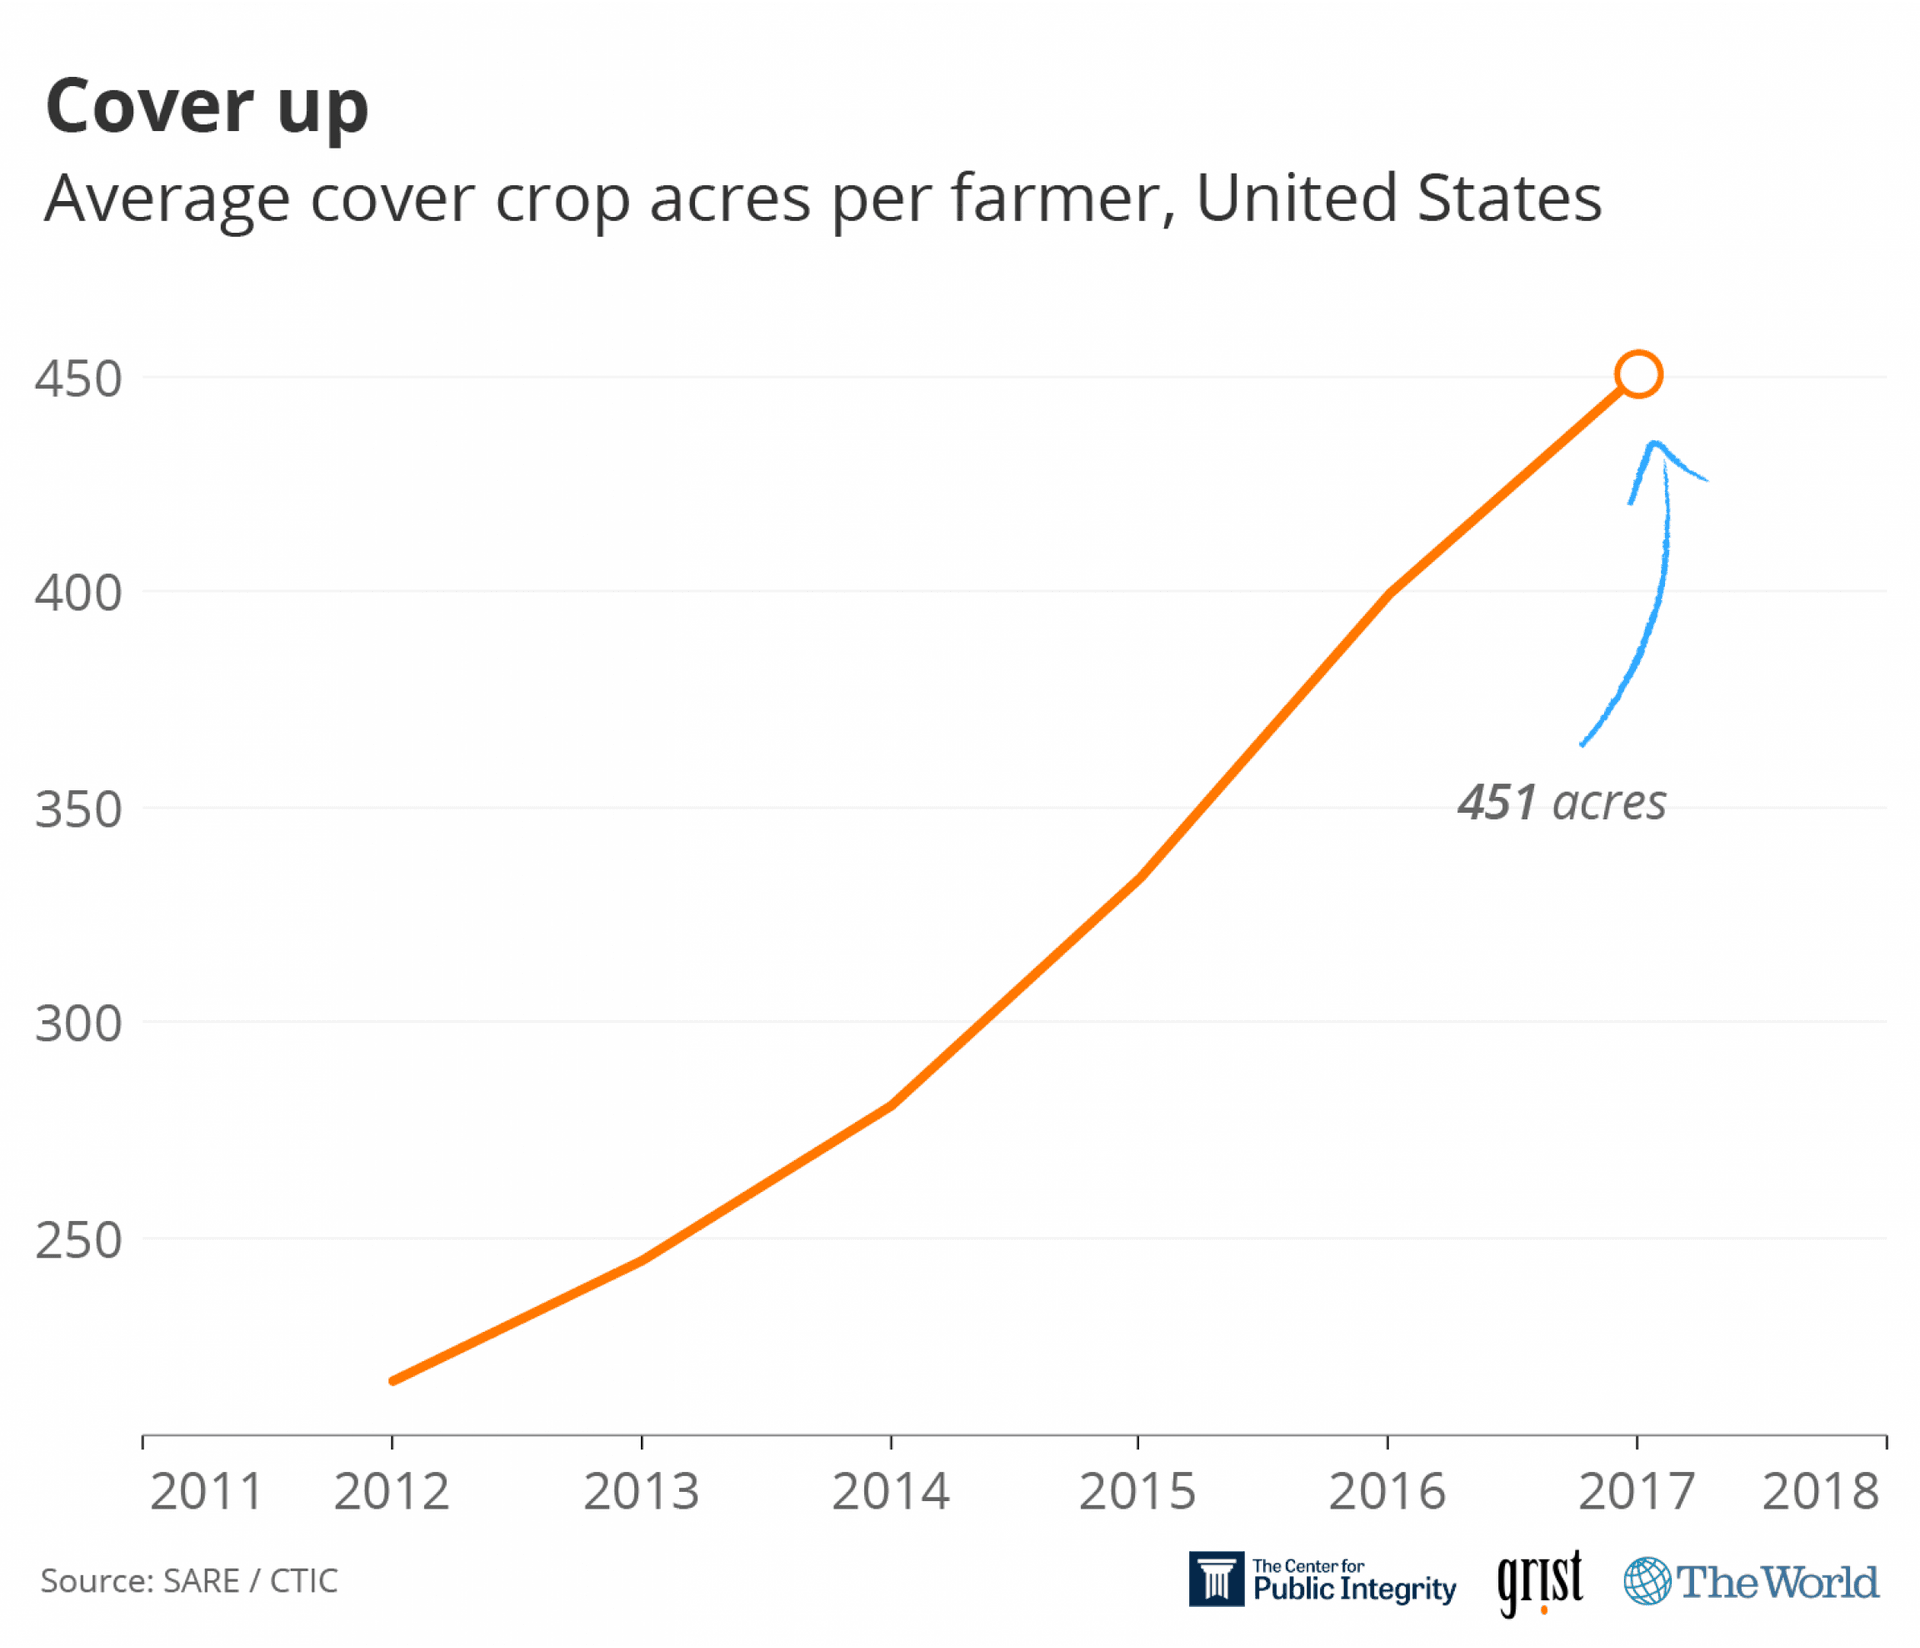 A graphic showing the average cover crop acres per farmer in the United States steadily going up.